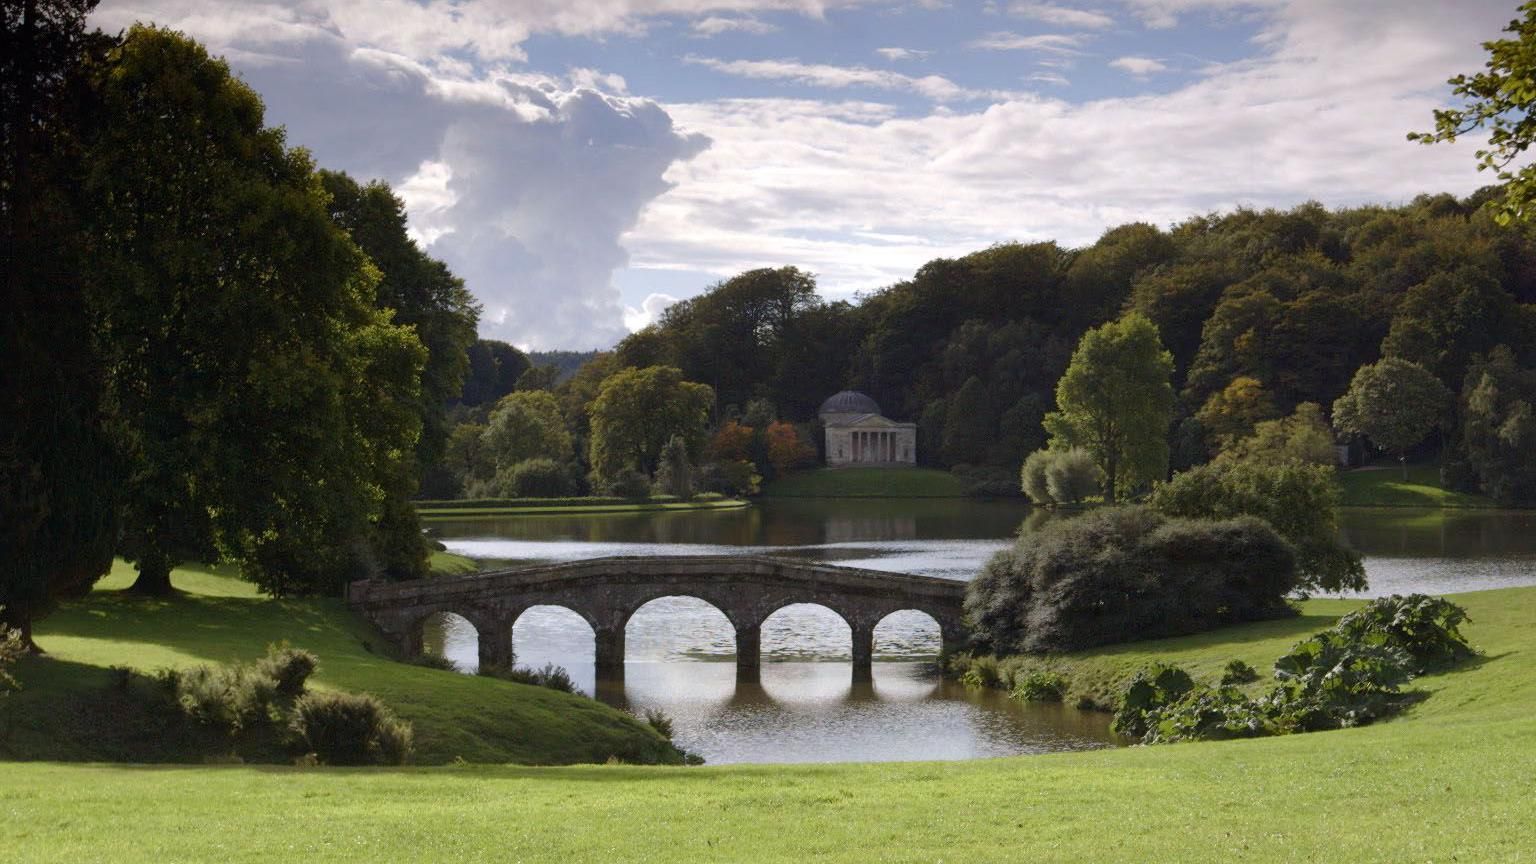 A picture of the lake on the Stourhead estate, which has a classically-inspired building in the background and a small arched bridge in the foreground. 